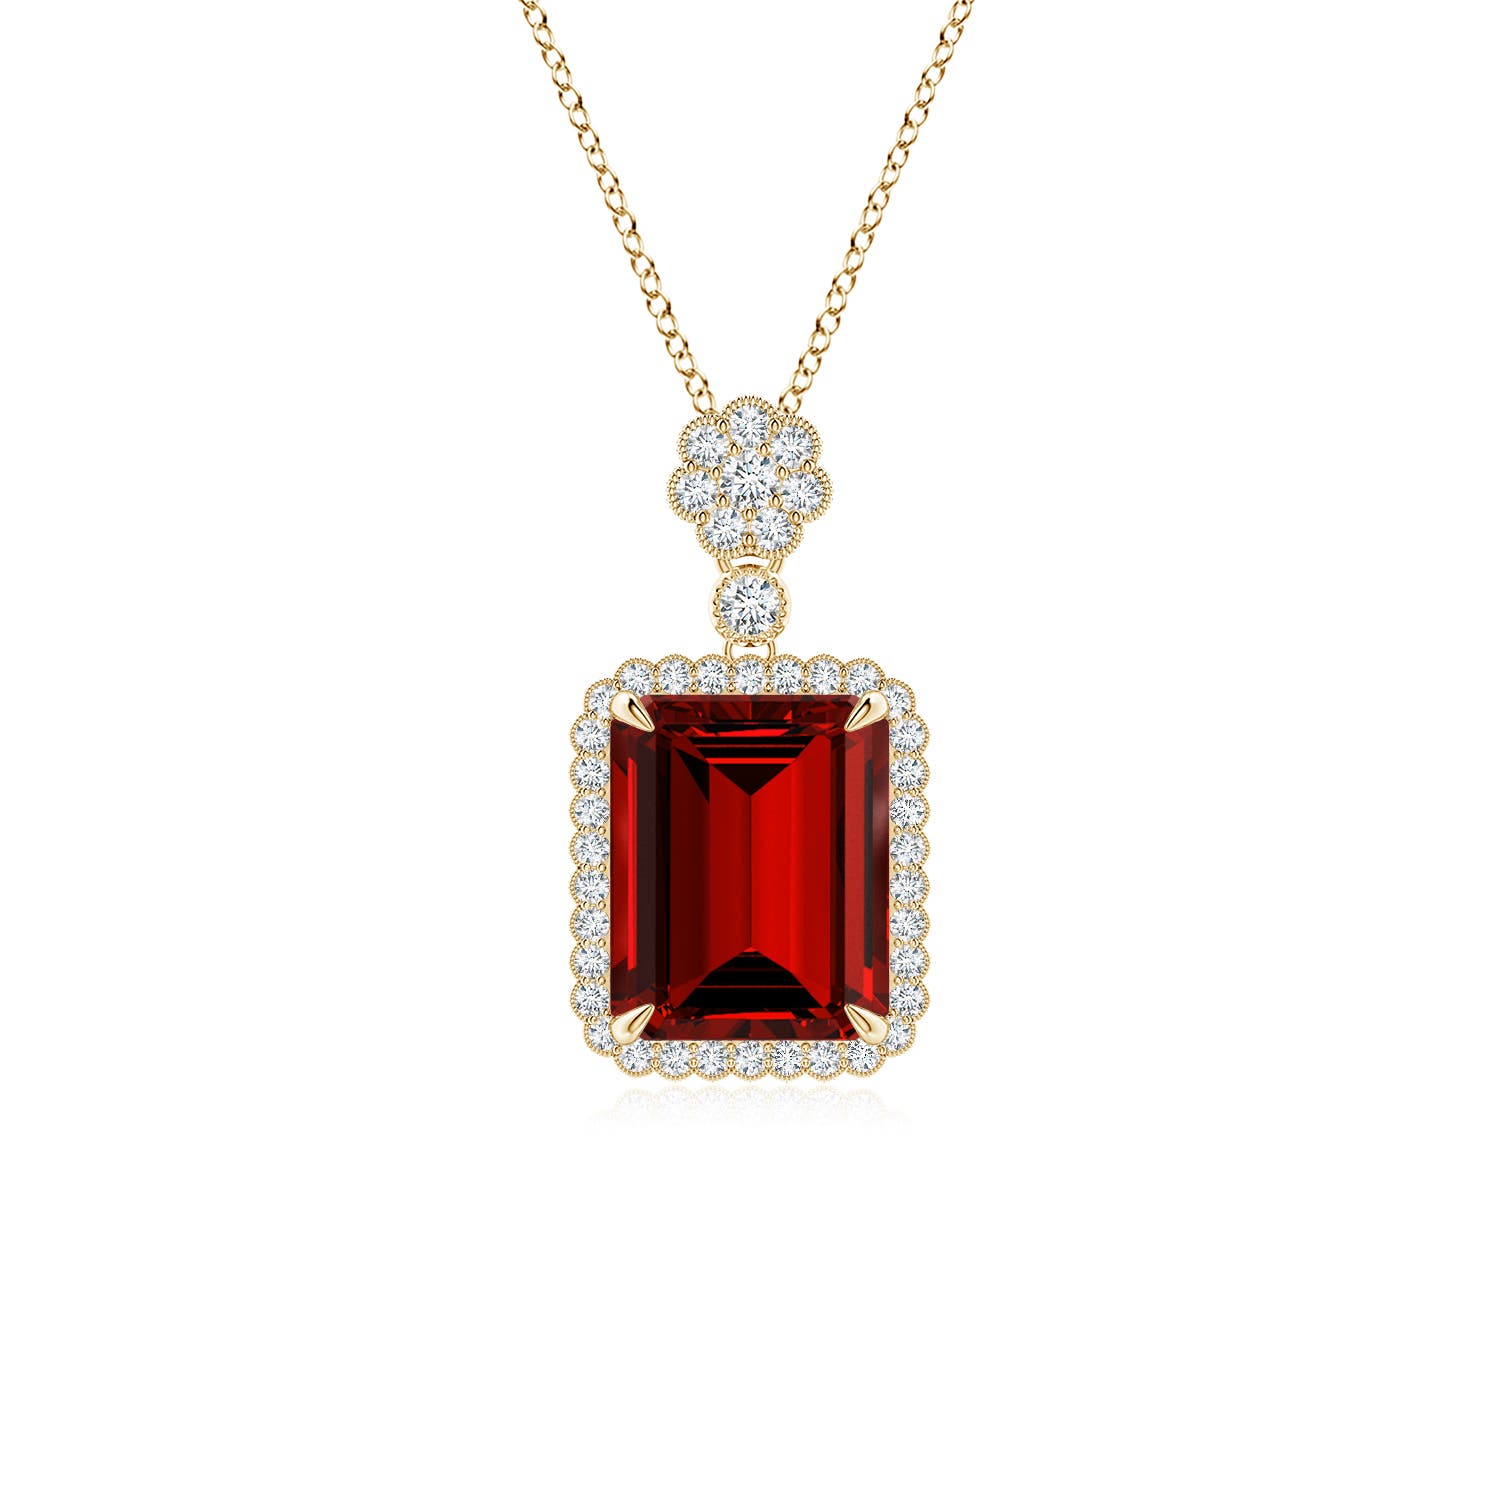 Lab-Grown Emerald cut Ruby Pendant with Floral Bale